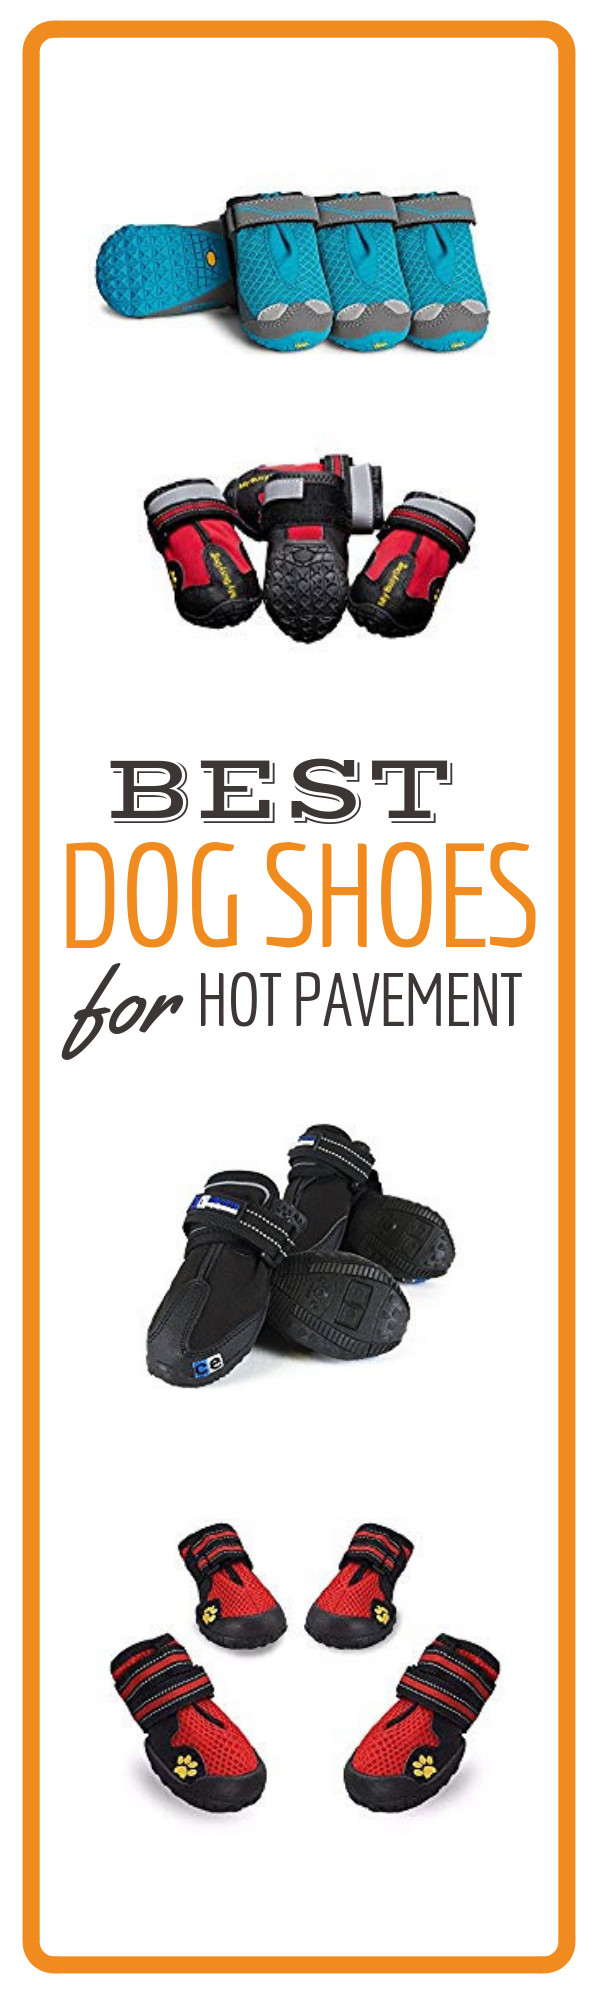 DIY Dog Booties For Hot Pavement
 Best Dog Shoes for Hot Pavement How Hot Is Too Hot for